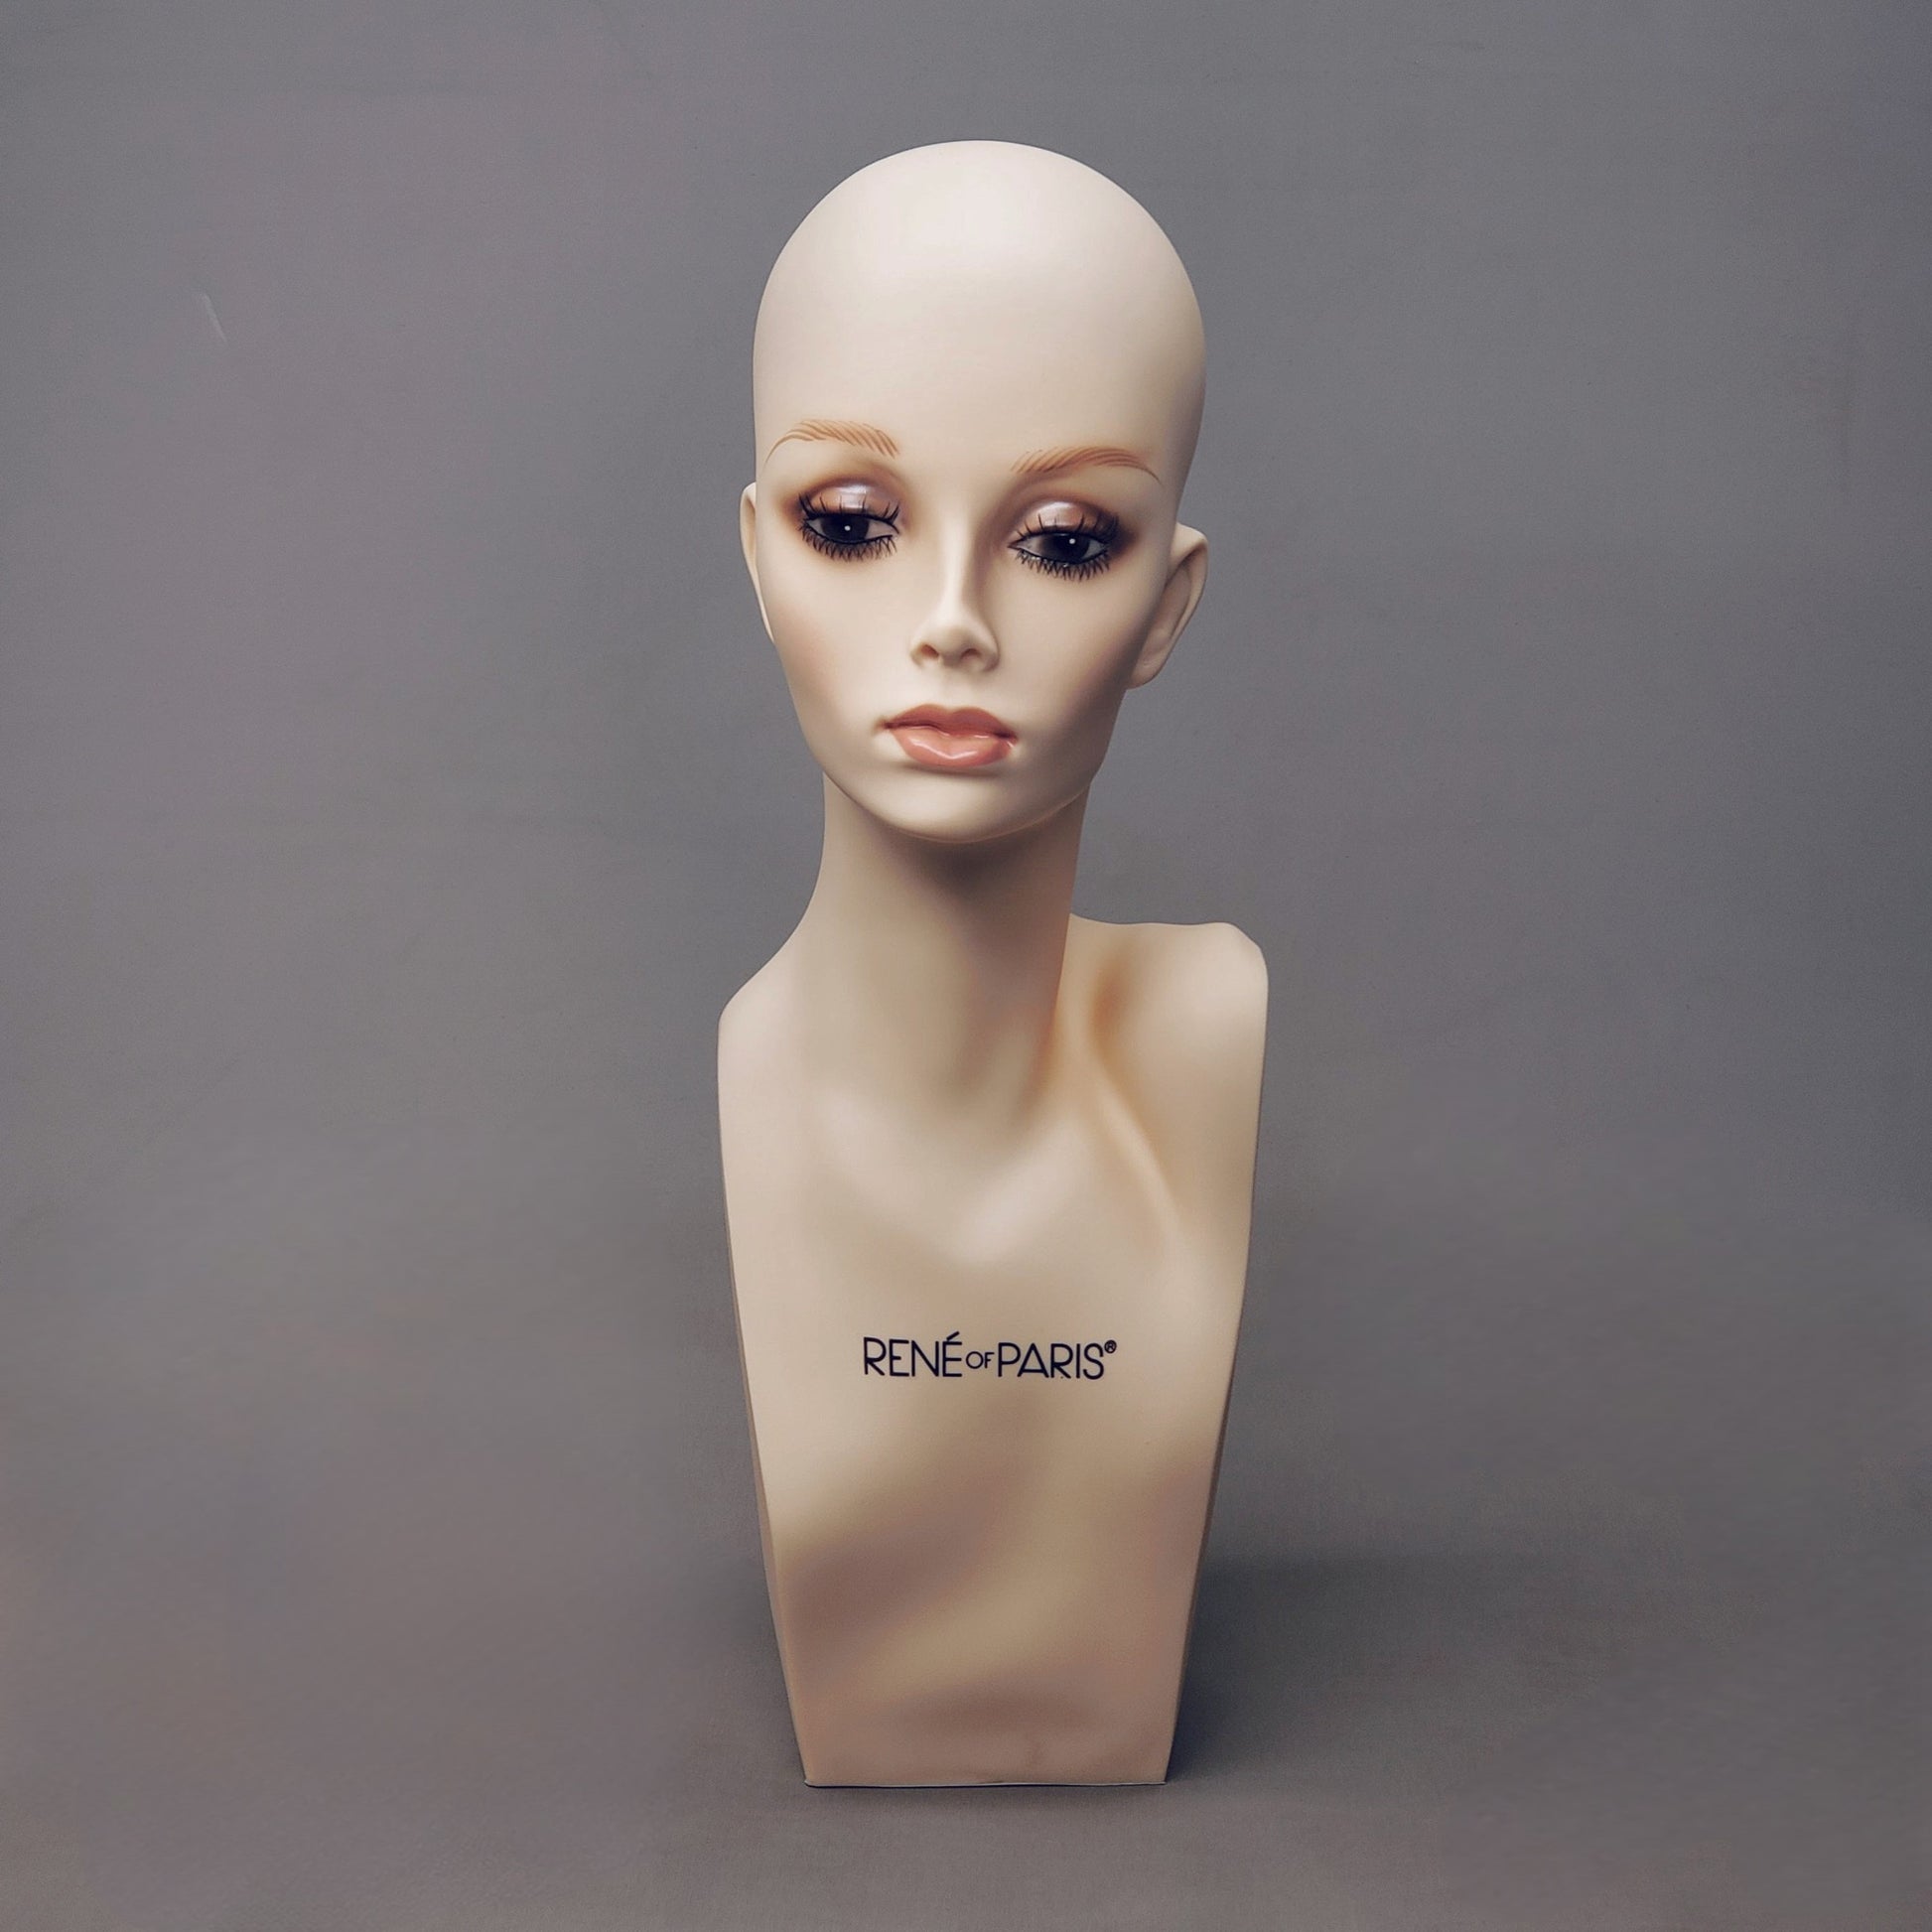 RENE of PARIS Flesh Mannequin Female Head 17 for Wig Styling 215133 ( –  PayWut